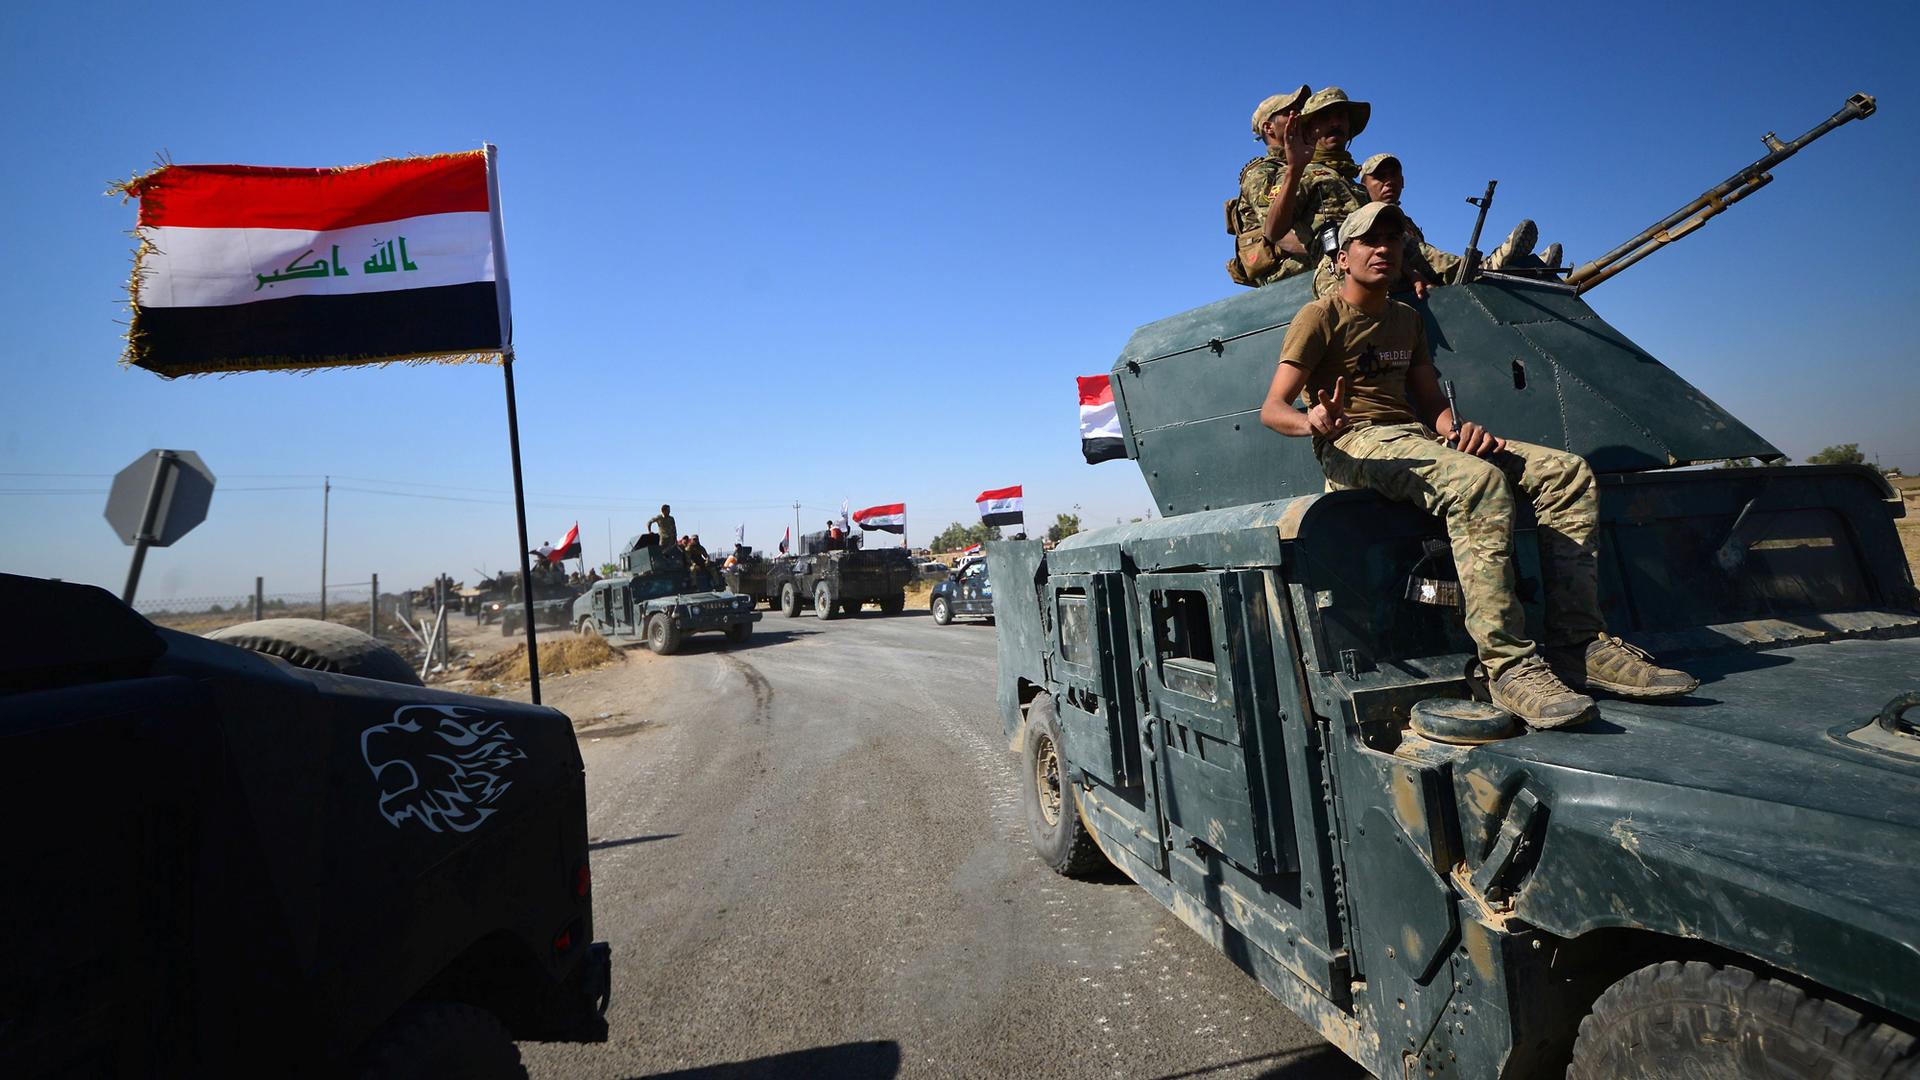 Members of Iraqi federal forces drive along desert roads in Kirkuk with Iraqi flags flying.